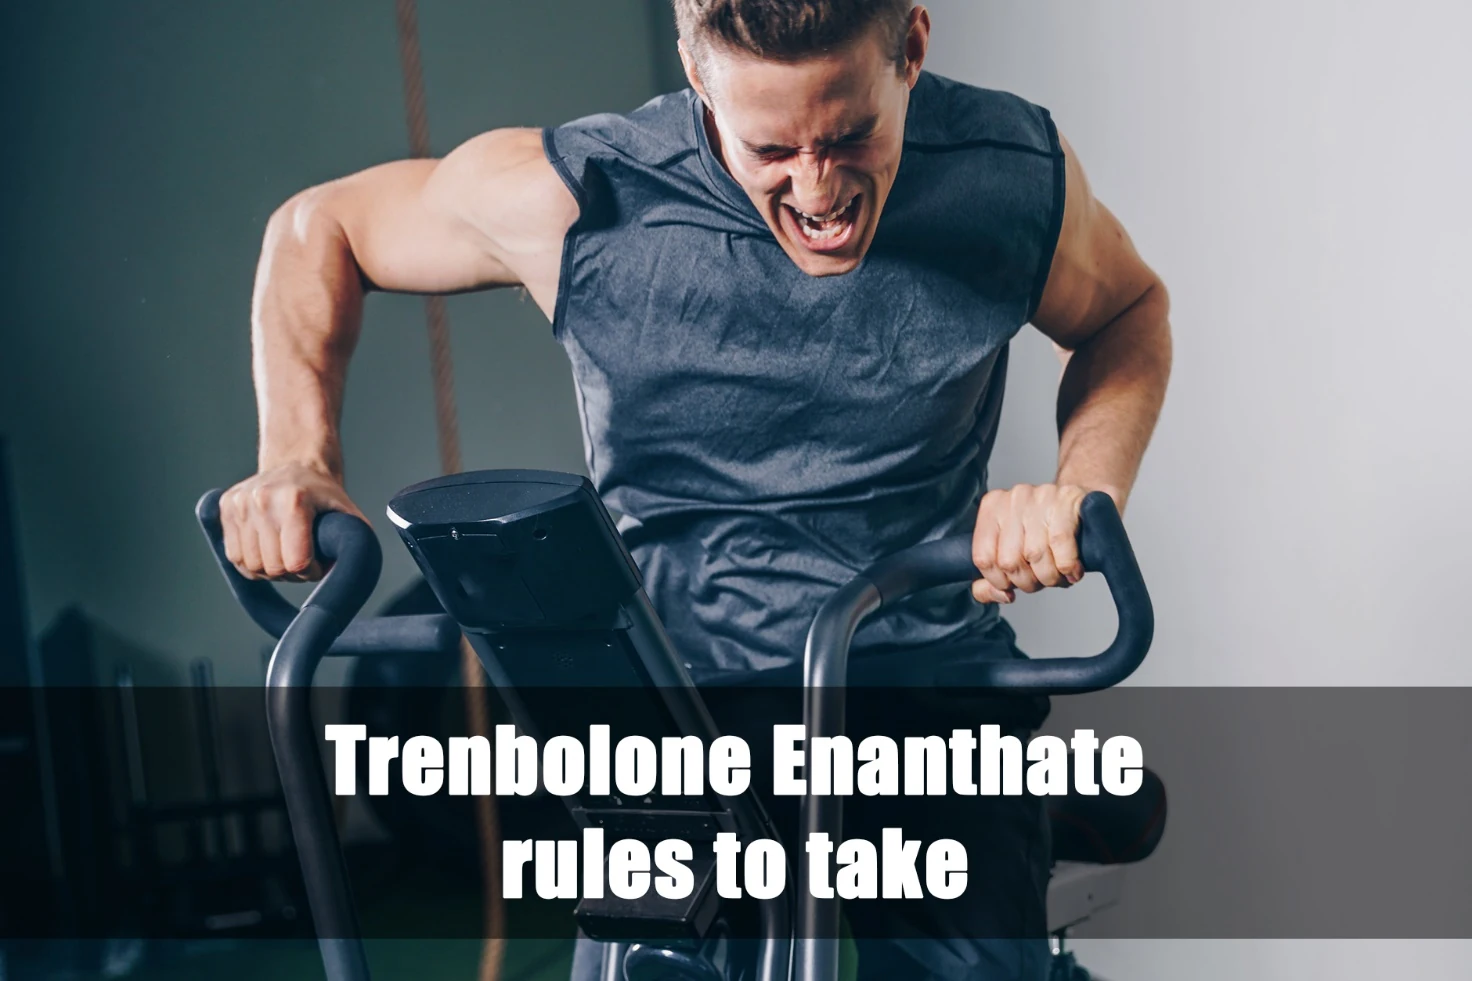 Trenbolone Enanthate rules to take